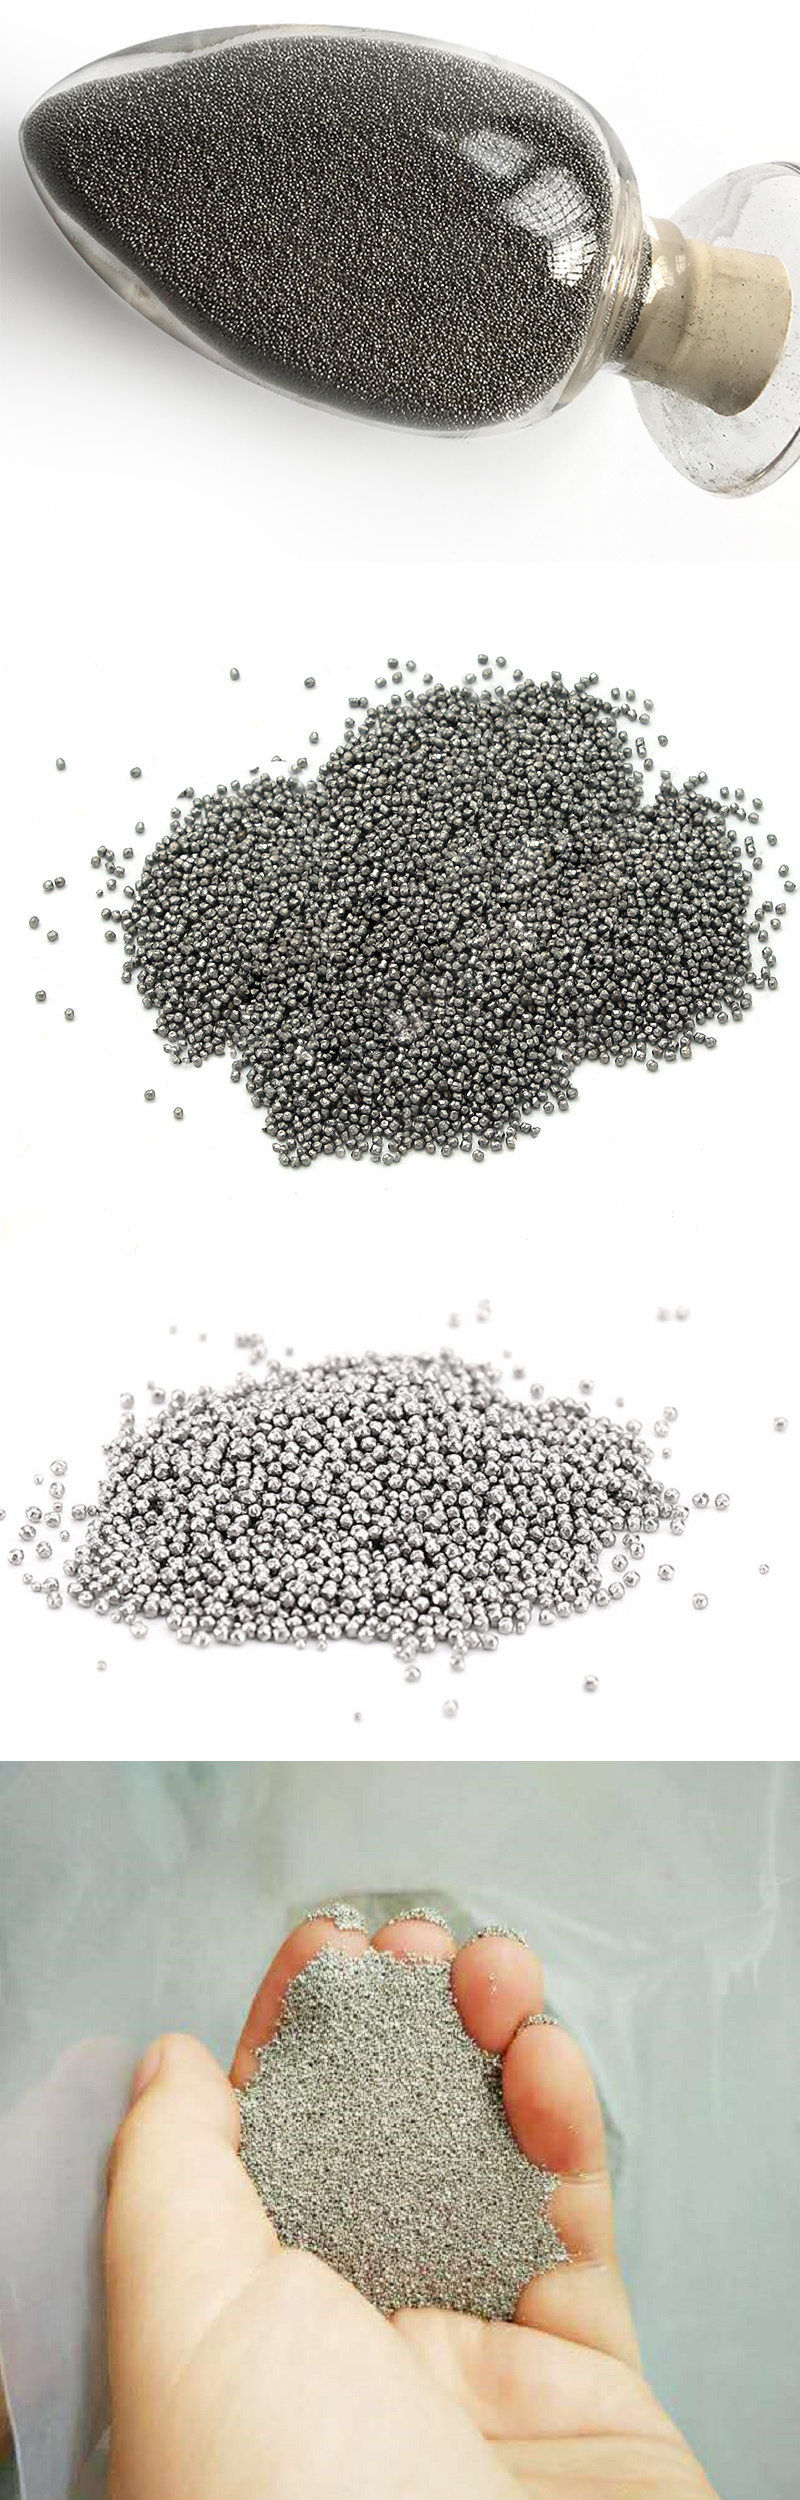 Chinese Suppliers S550 Steel Shot 1.7mm for Blasting Cleaning